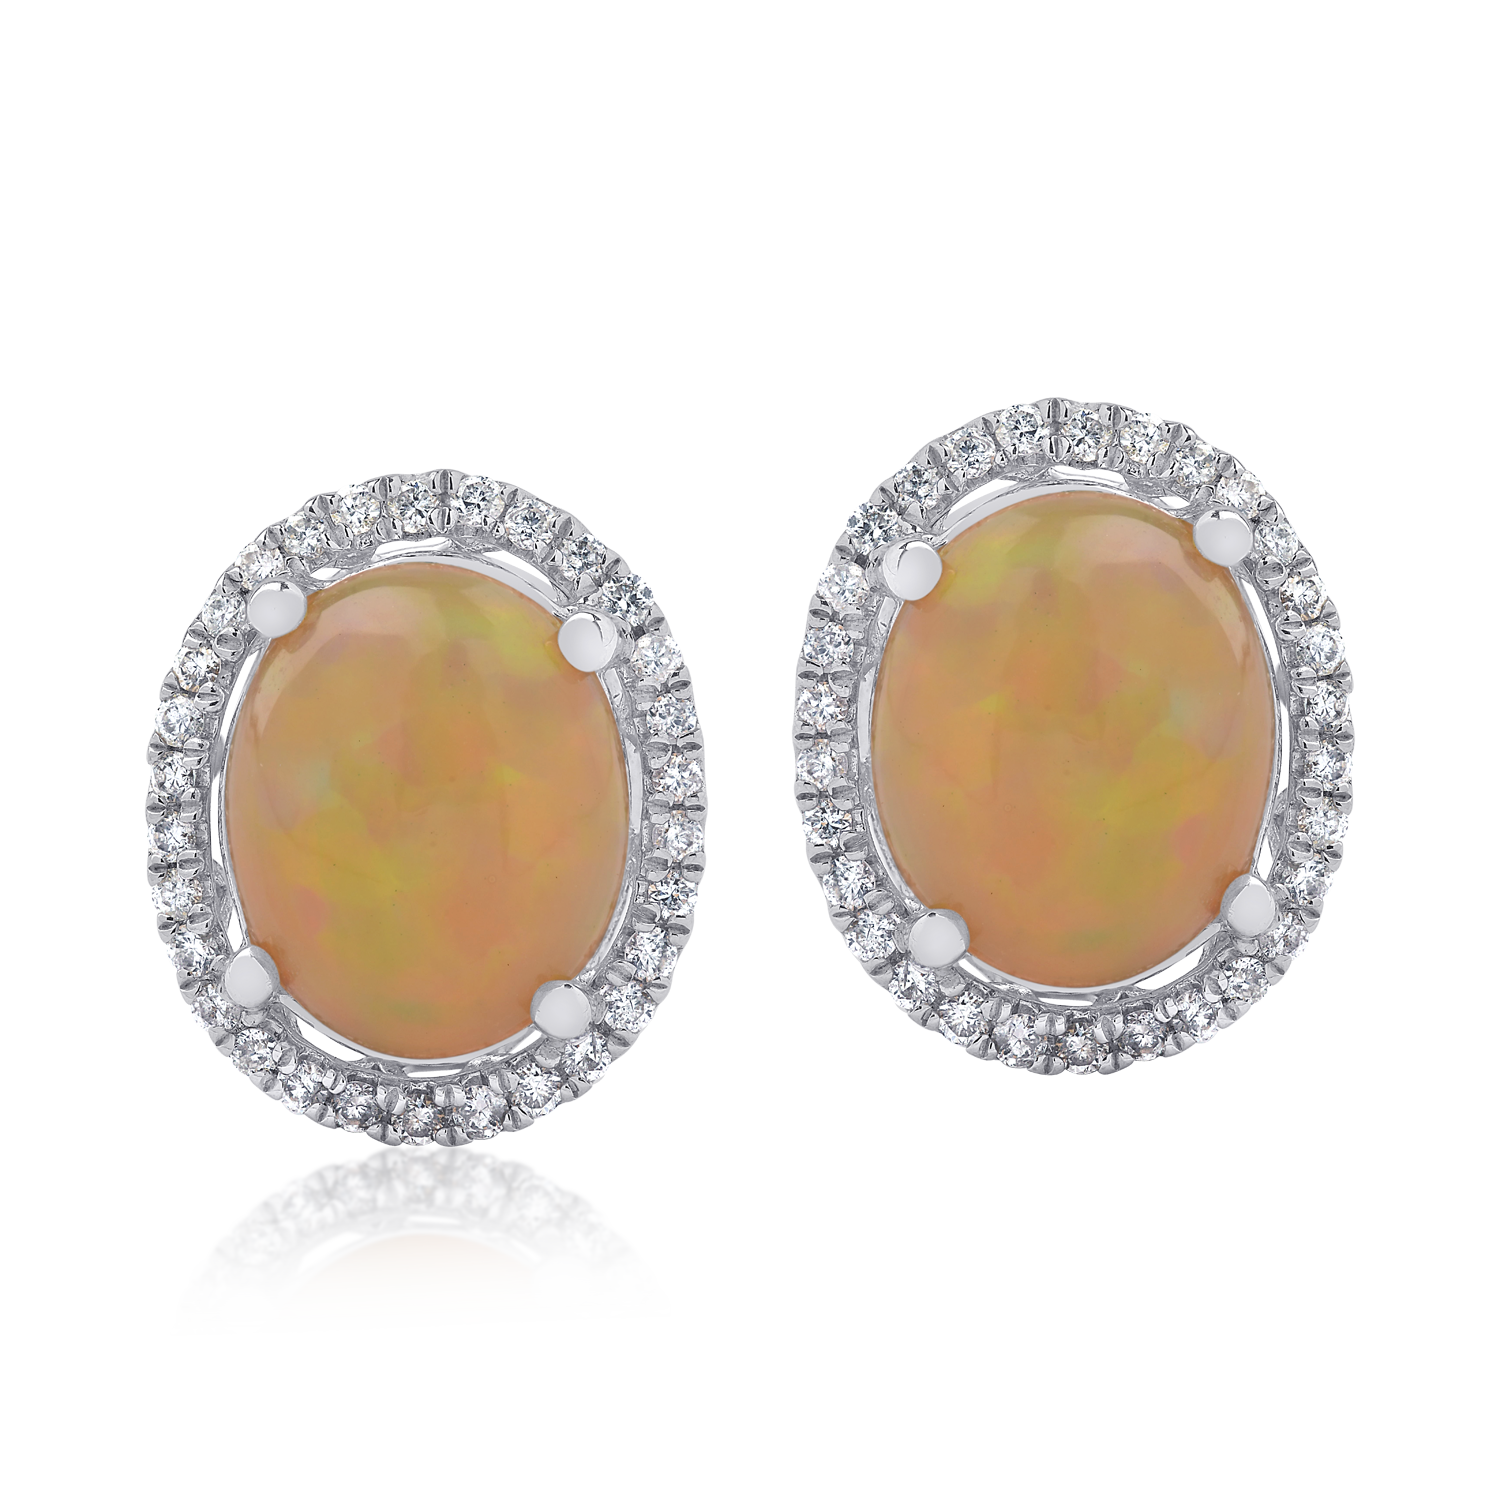 14K white gold earrings with 2.83ct opals and 0.3ct diamonds